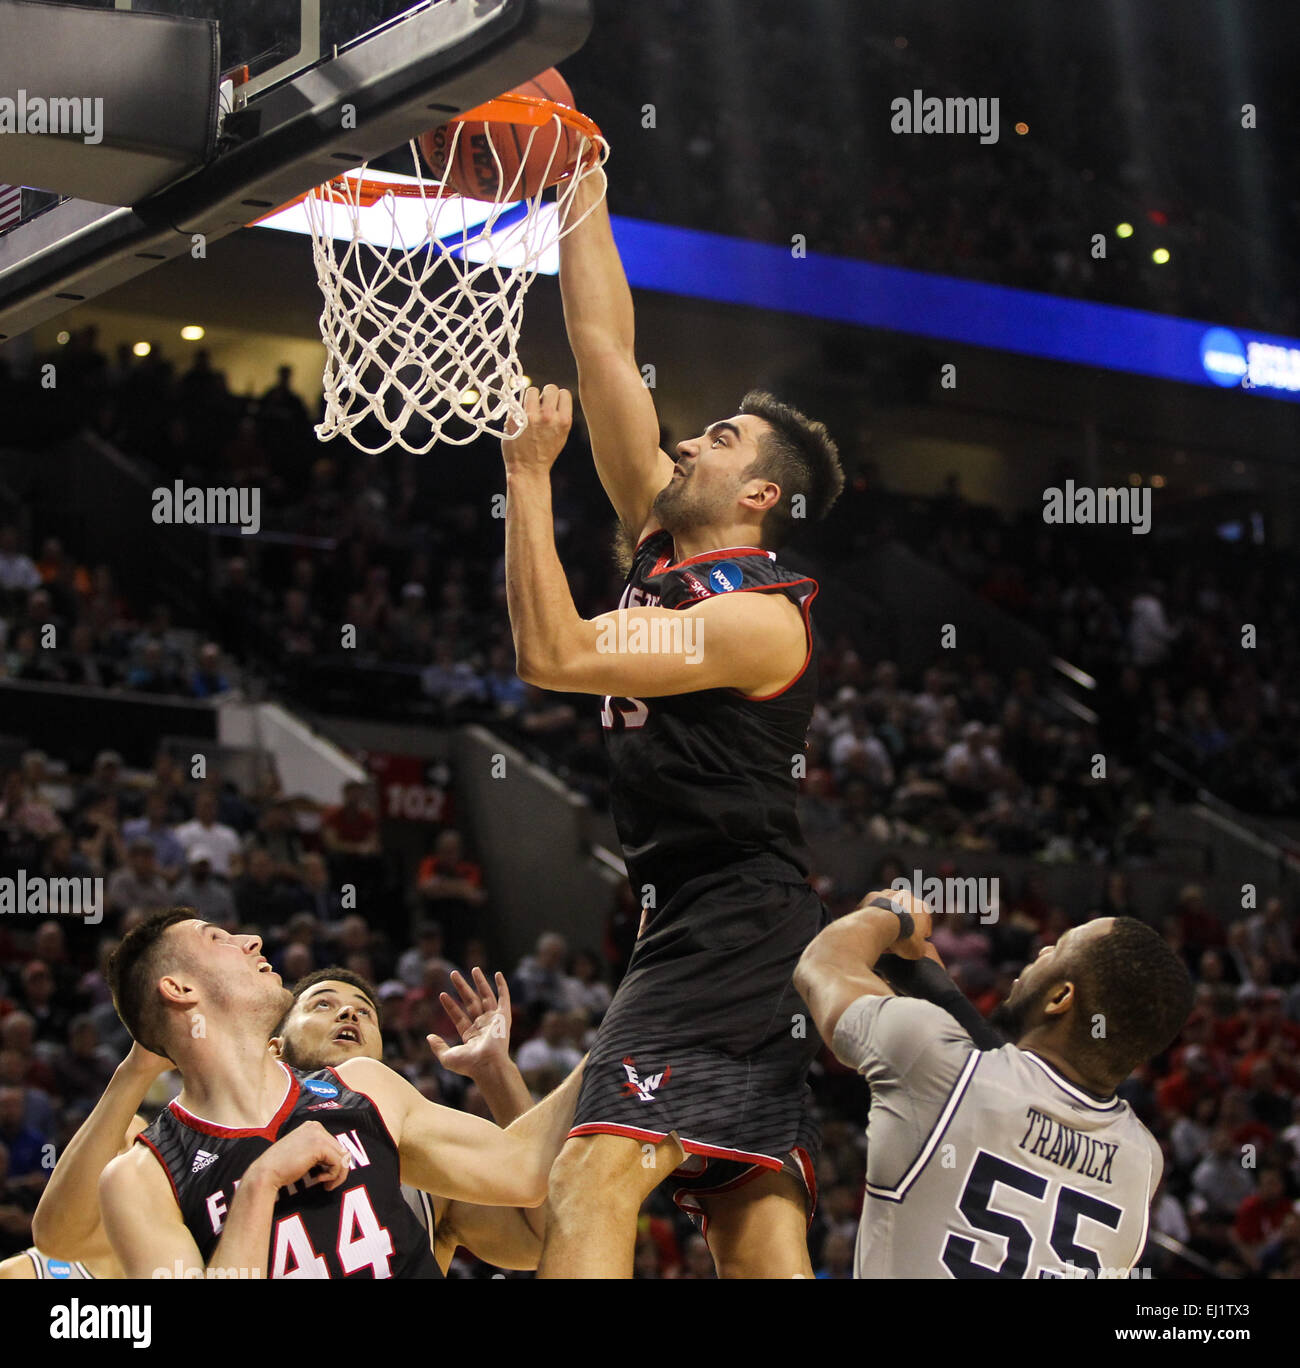 Portland, Oregon, USA. 19th March, 2015. VENKY JOIS (55) dunks the ball. The Georgetown Hoyas play the Eastern Washington Eagles at the Moda Center on March 19, 2015. Credit:  David Blair/ZUMA Wire/Alamy Live News Stock Photo